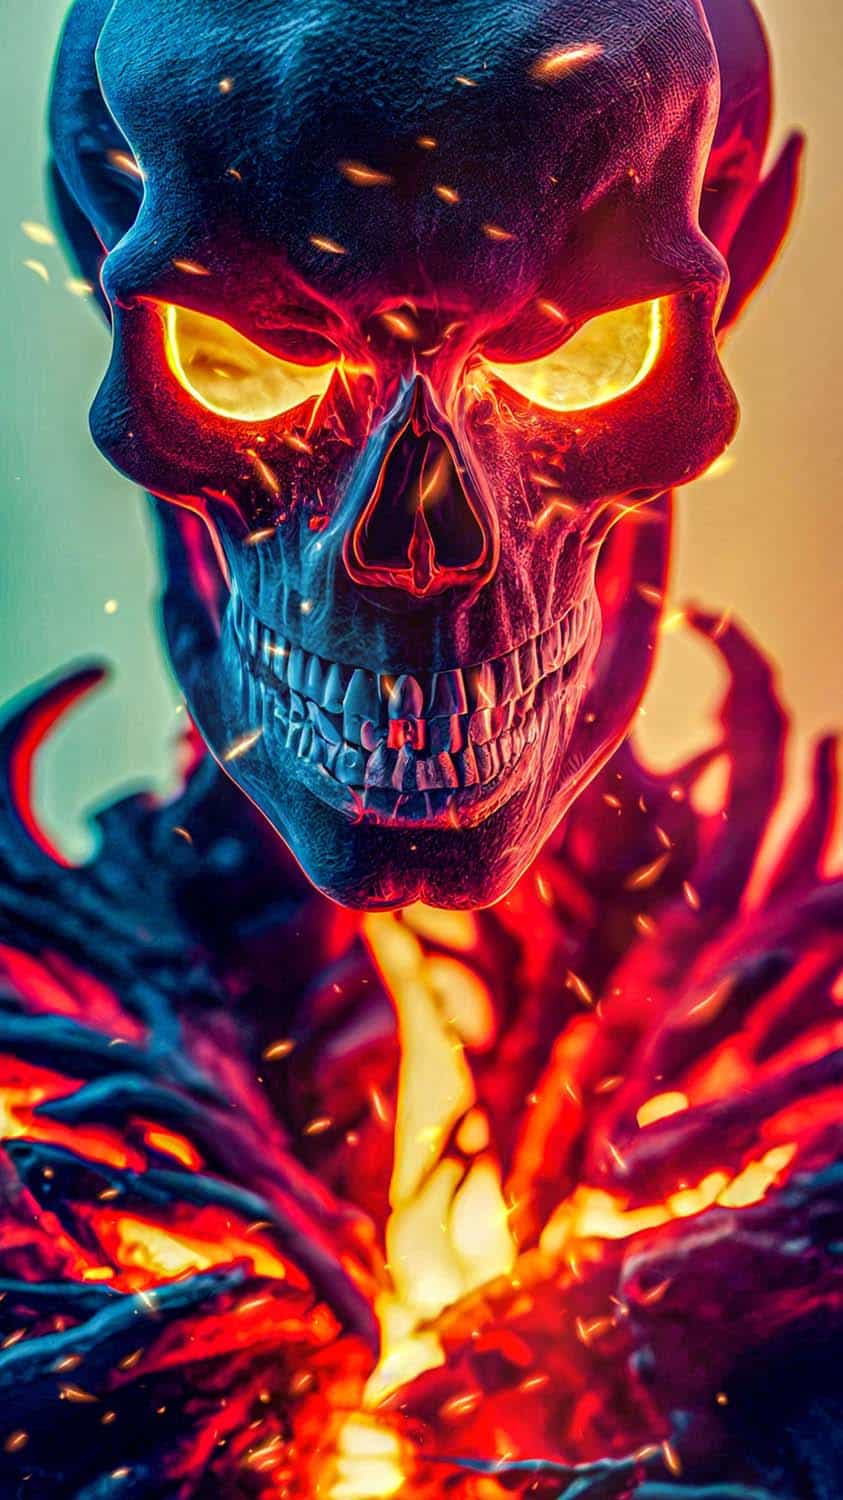 Fire Skull IPhone Wallpaper HD - IPhone Wallpapers : iPhone Wallpapers